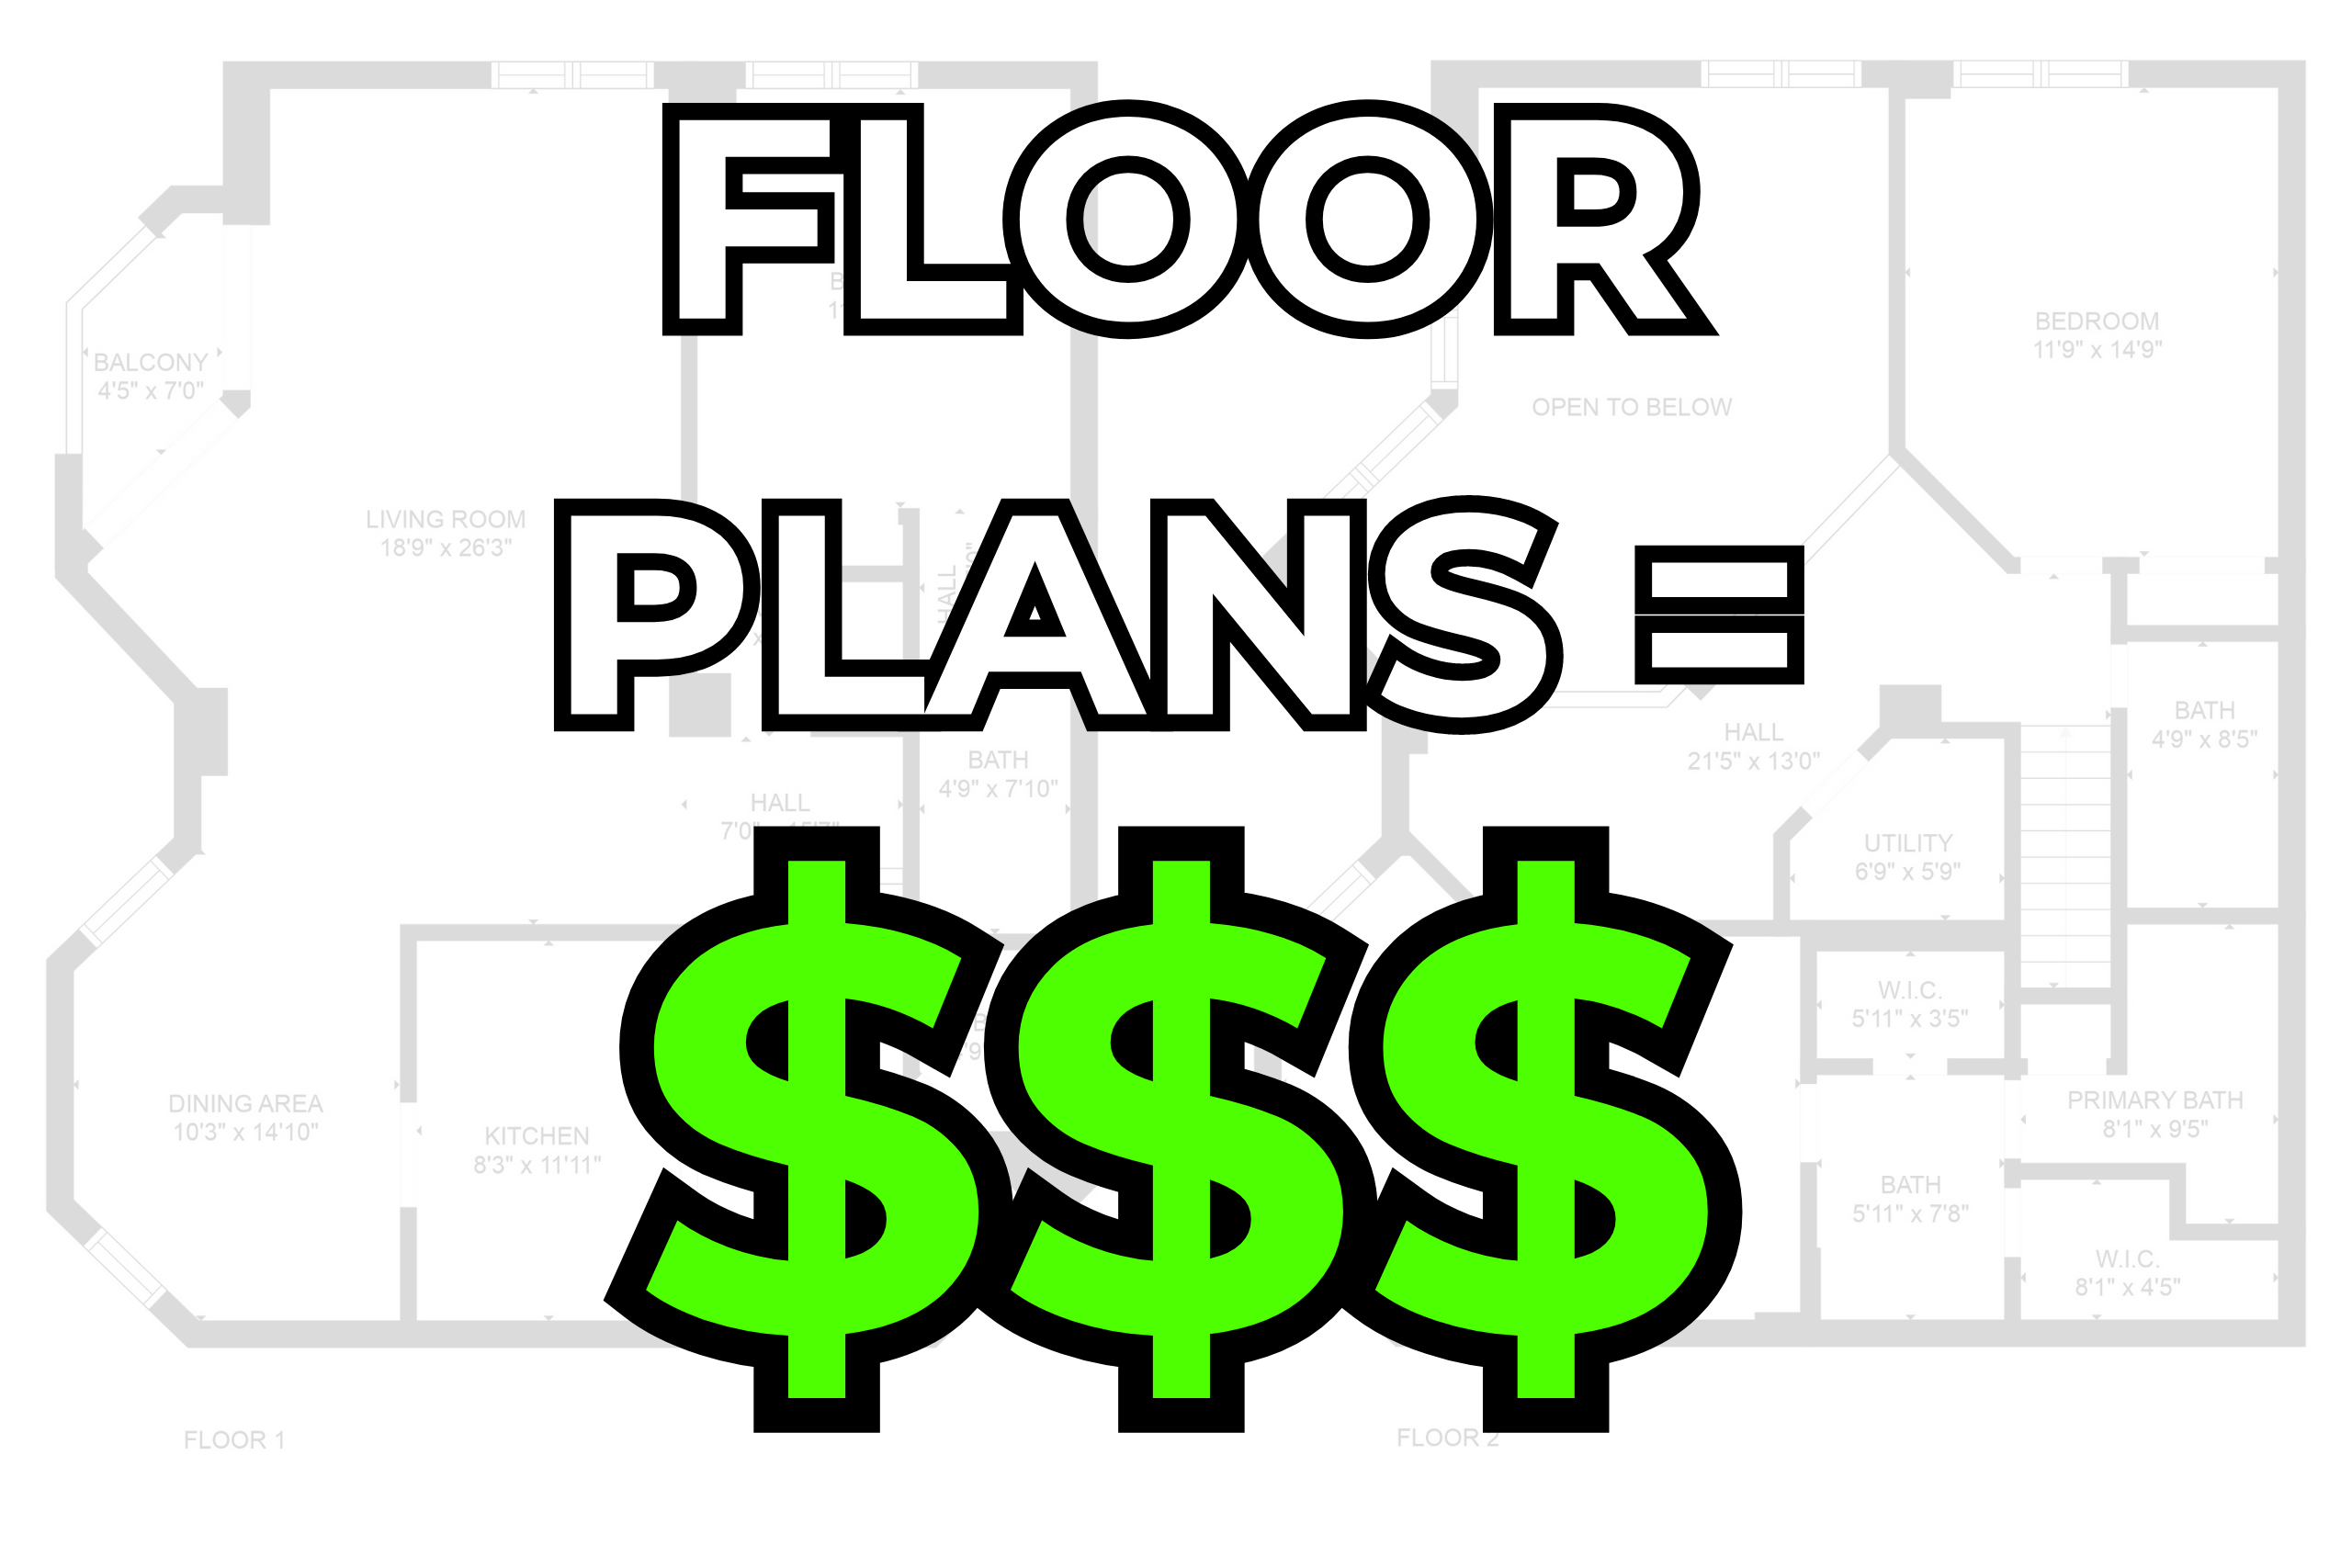 photo of floor plan showing that including a floor plan when selling a home will get you more money.